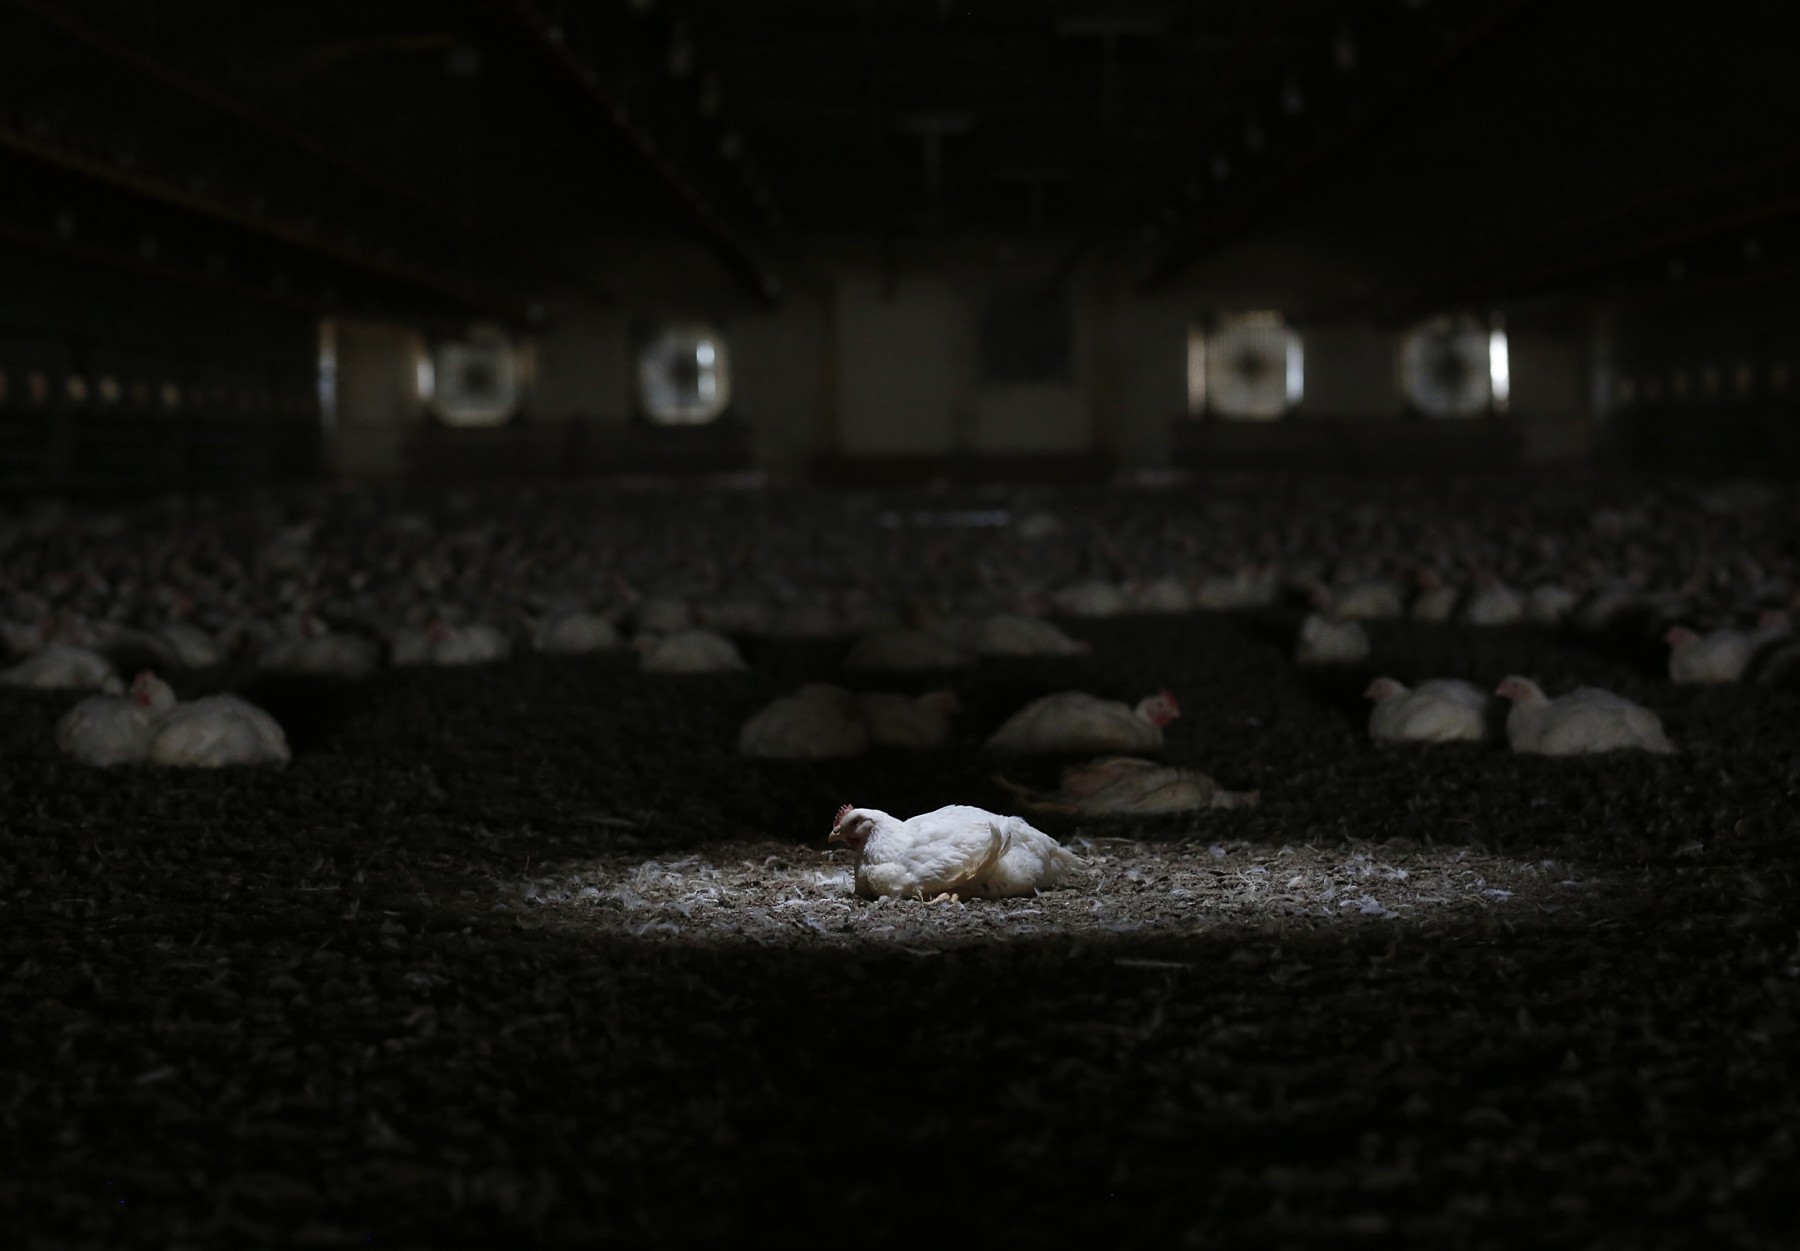 Globally, more than 72 billion chickens are slaughtered for meat each year. In the photo: A 6-week-old broiler chicken